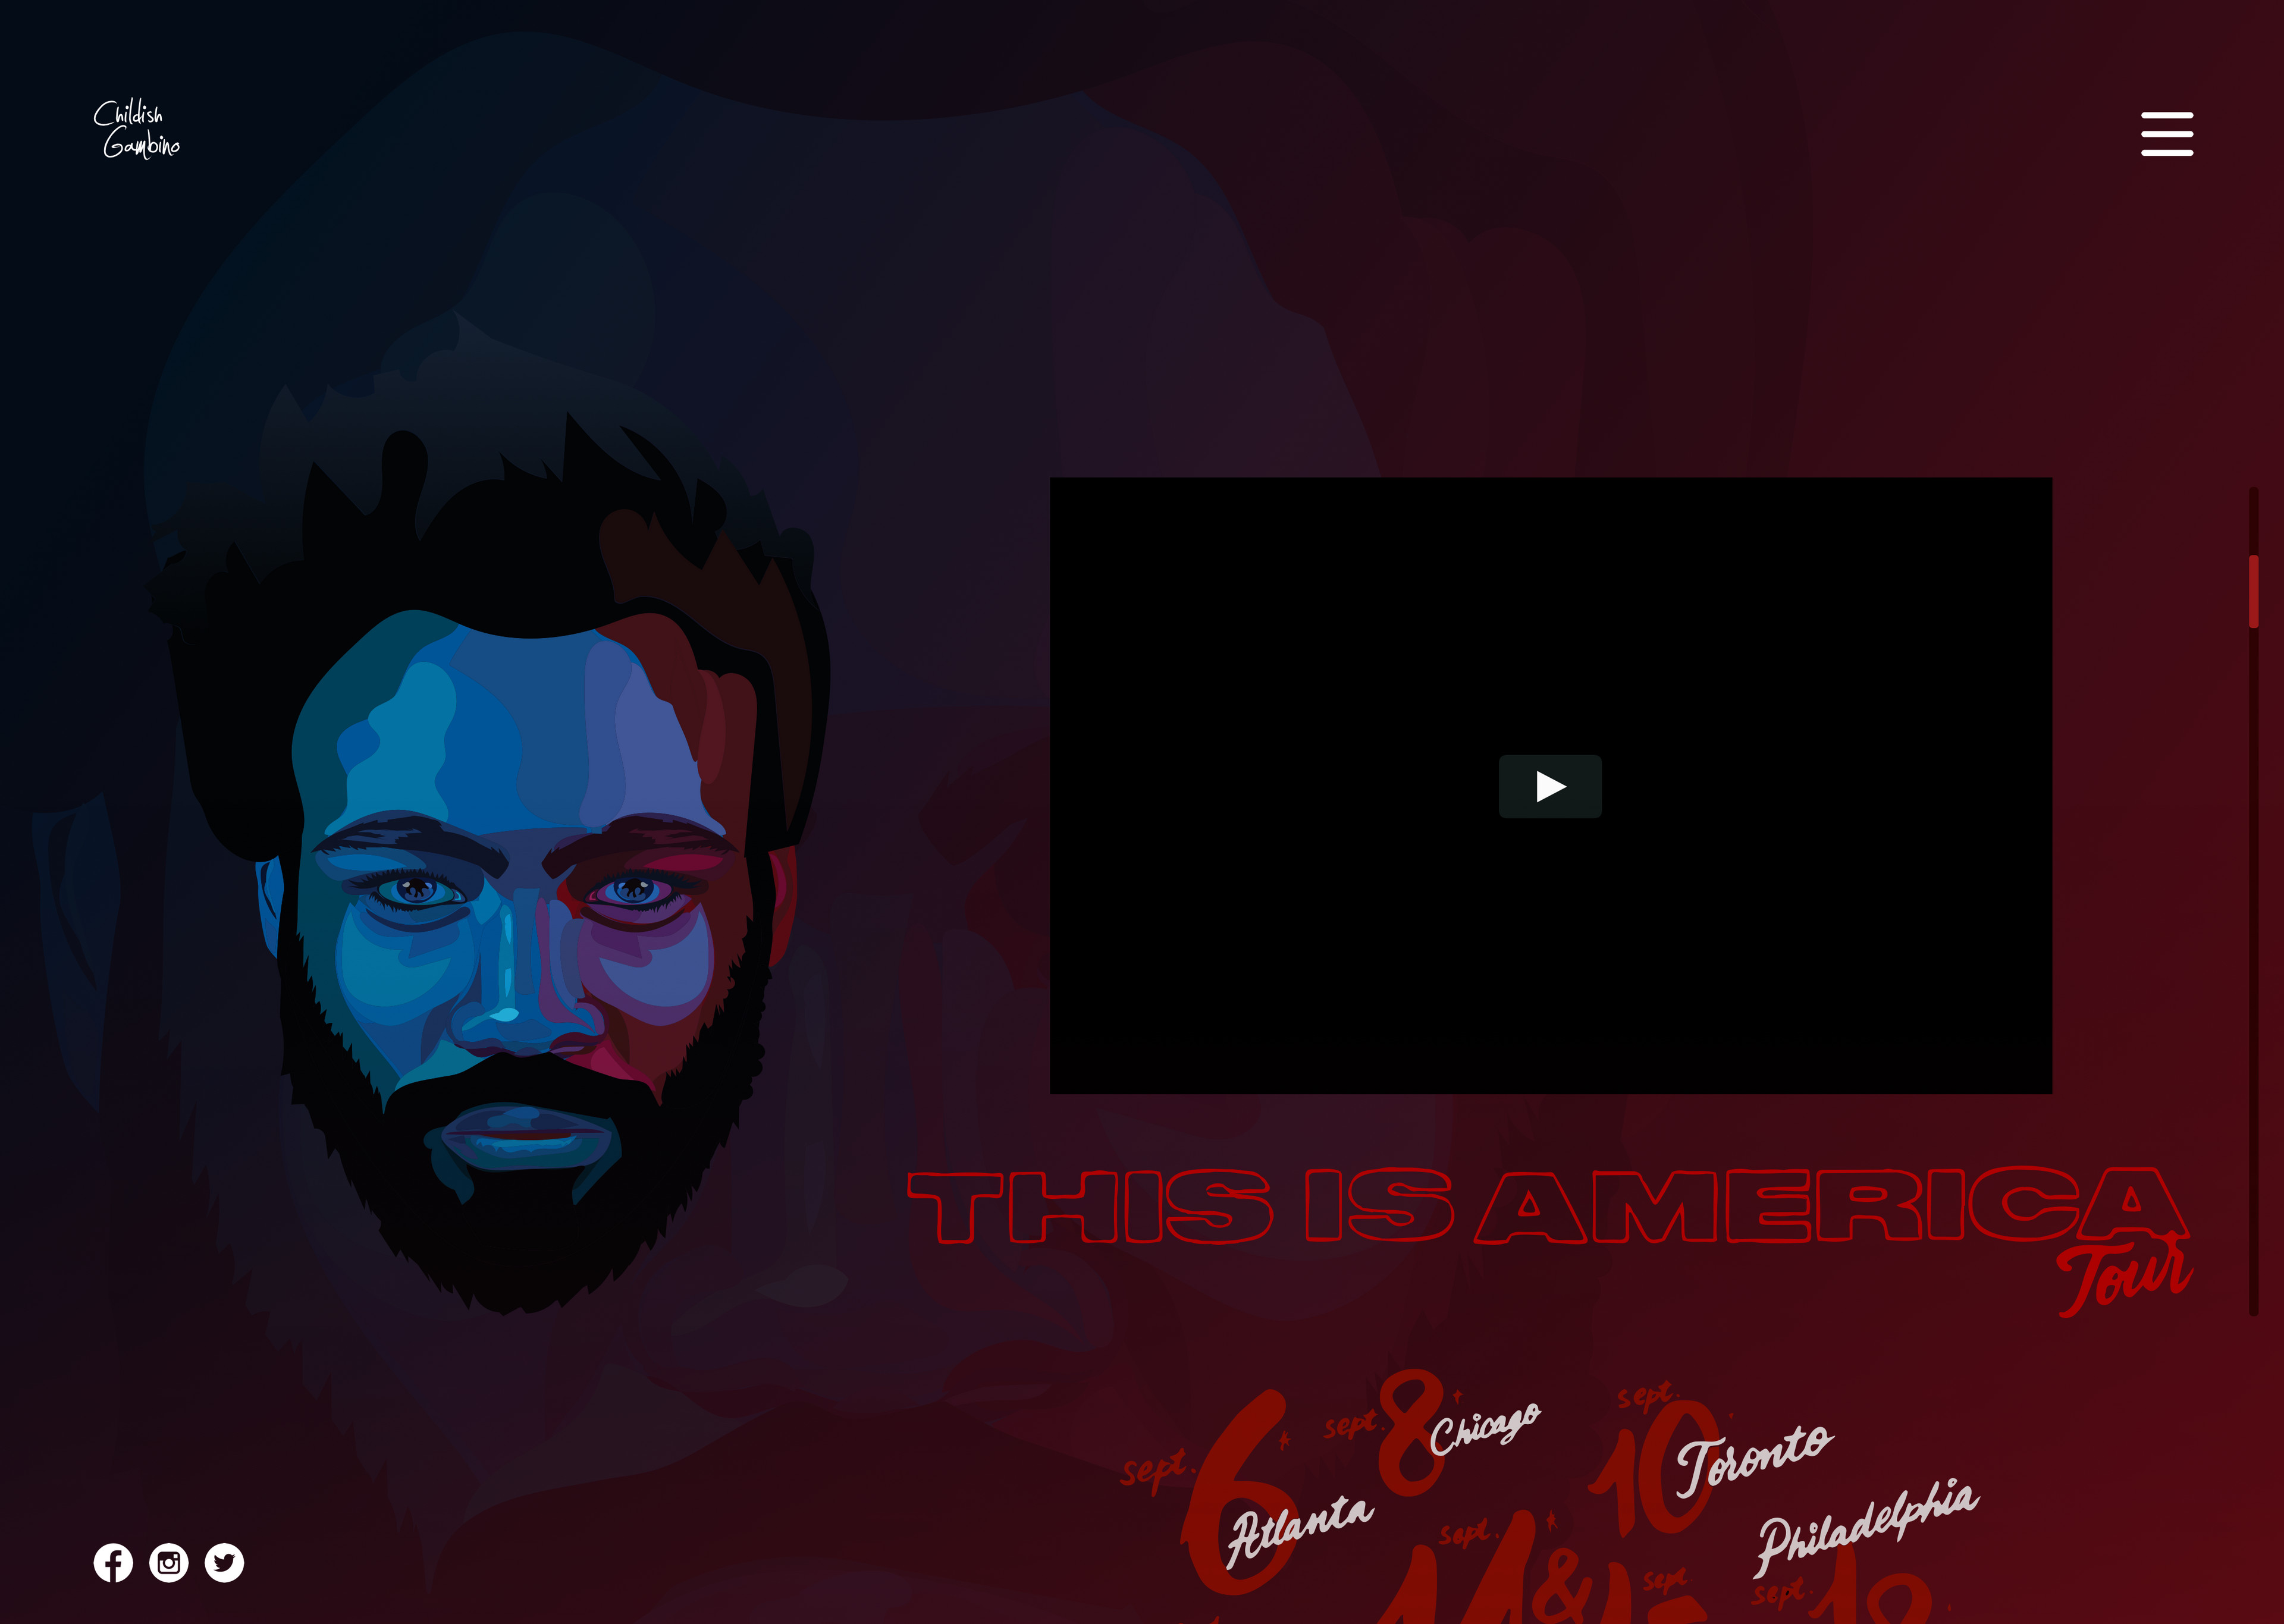 A custom design for Childish Gambino's official website.